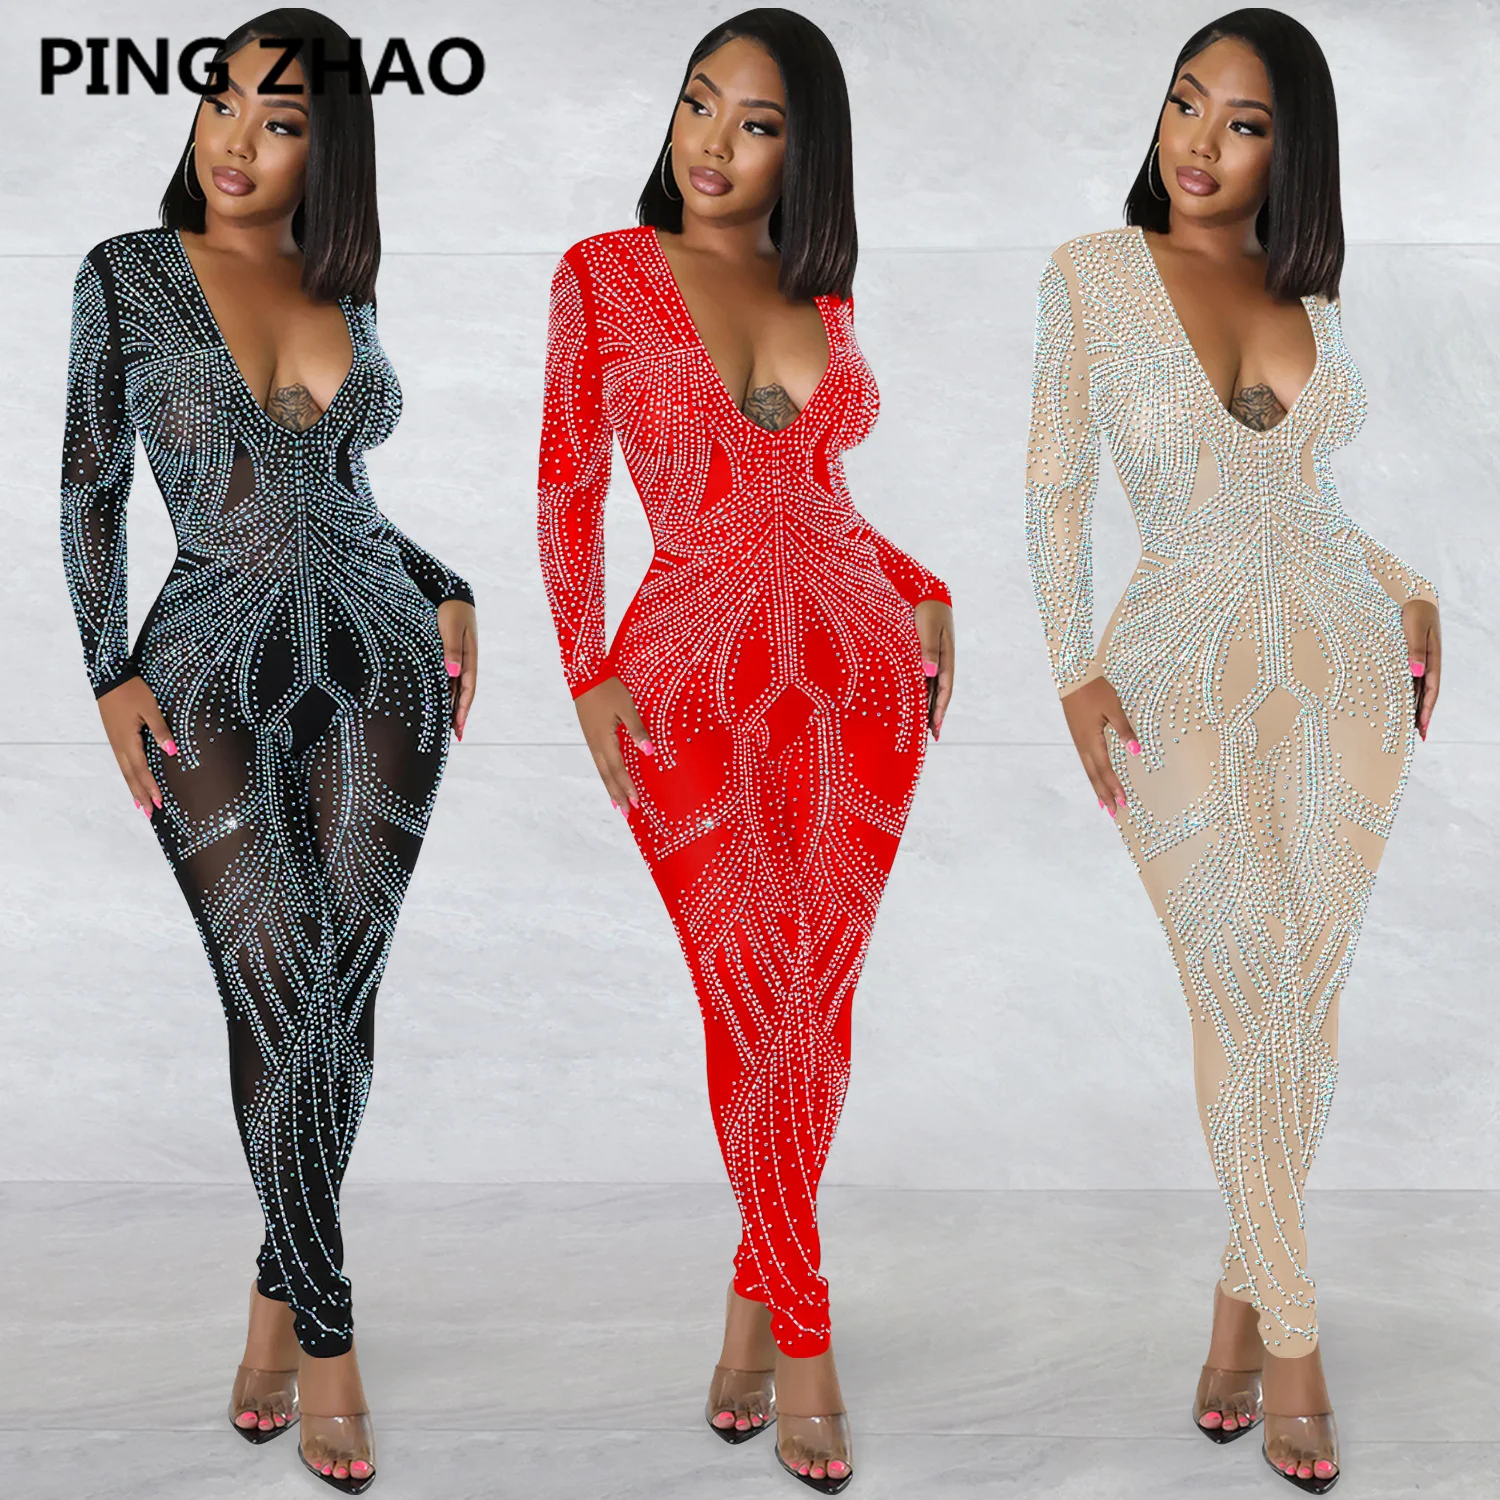 

PING ZHAO Diamonds Sheer Mesh Jumpsuit Women Sexy See Through Deep V Neck Long Sleeve Skinny Night Club Party Romper